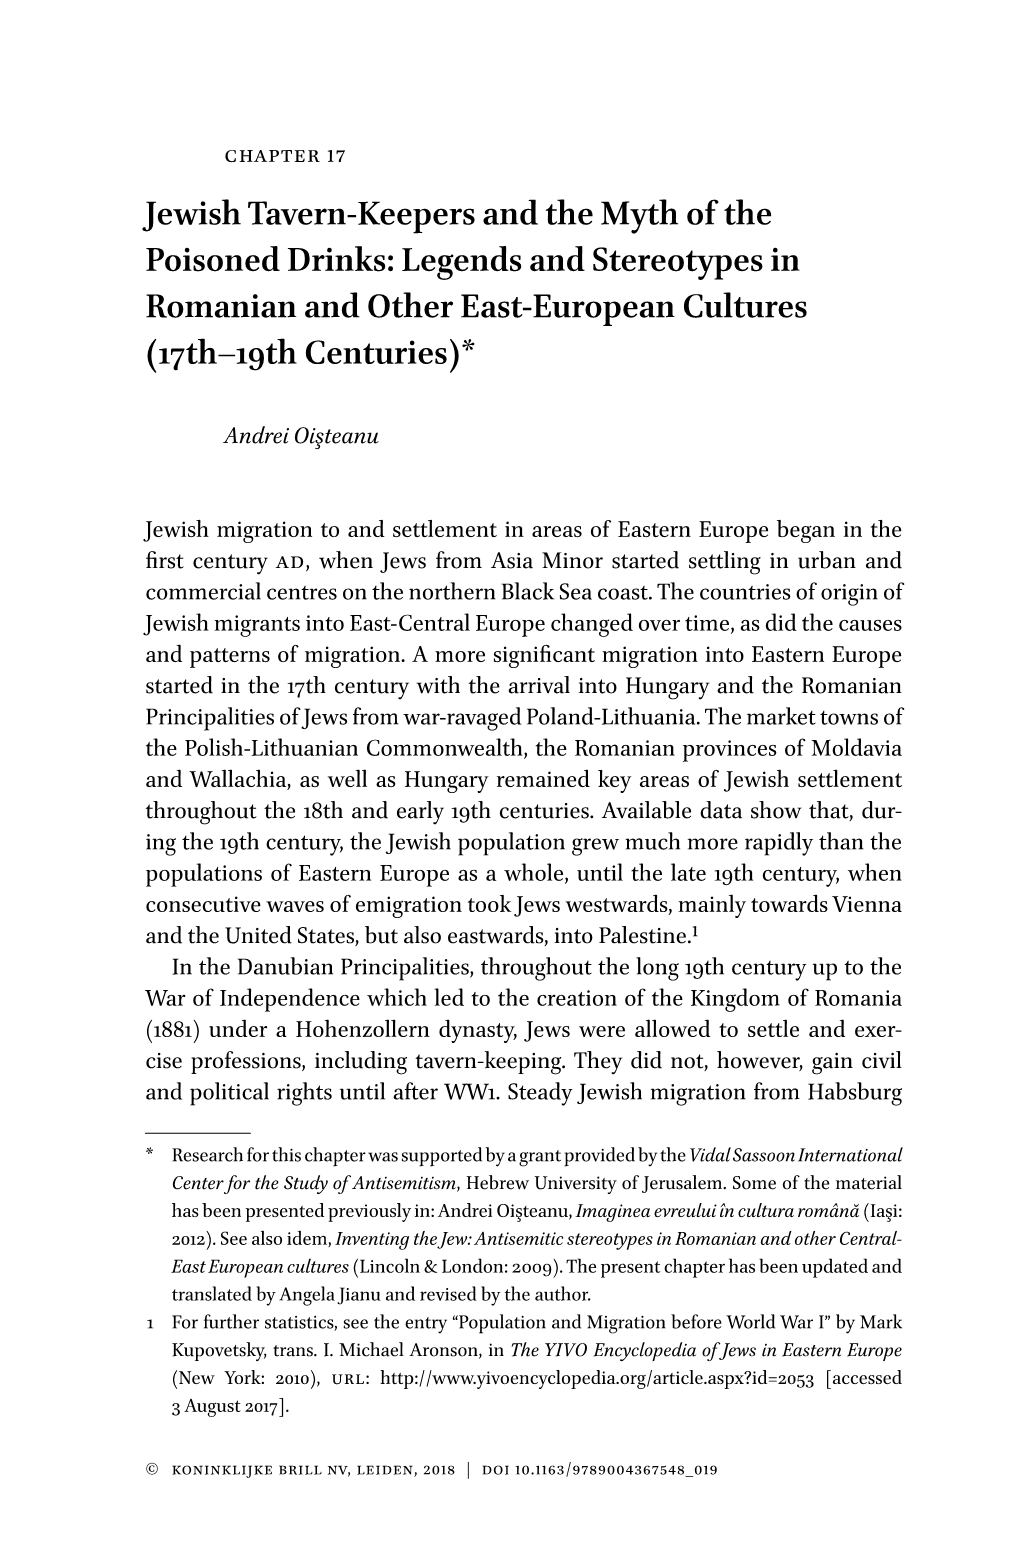 Jewish Tavern-Keepers and the Myth of the Poisoned Drinks: Legends and Stereotypes in Romanian and Other East-European Cultures (17Th–19Th Centuries)*